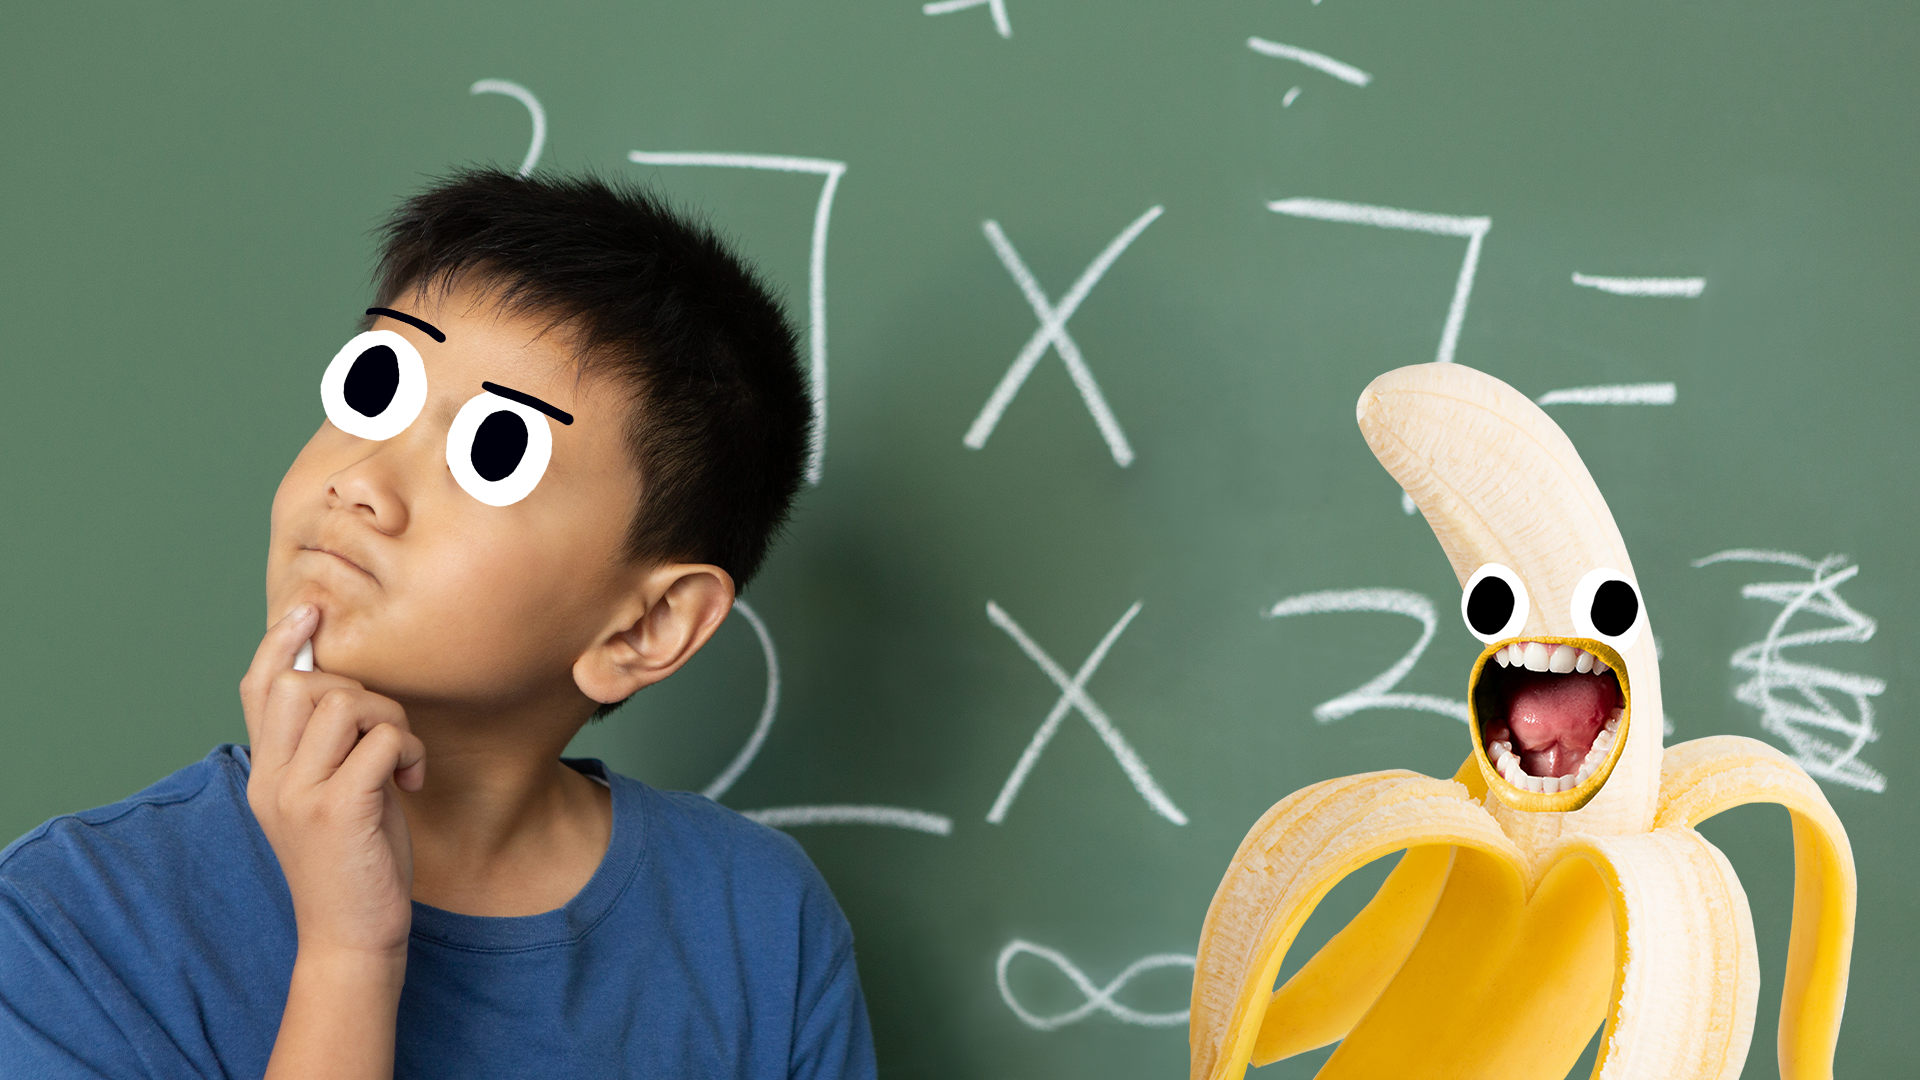 Puzzled looking boy in front of blackboard with screaming Beano banana 